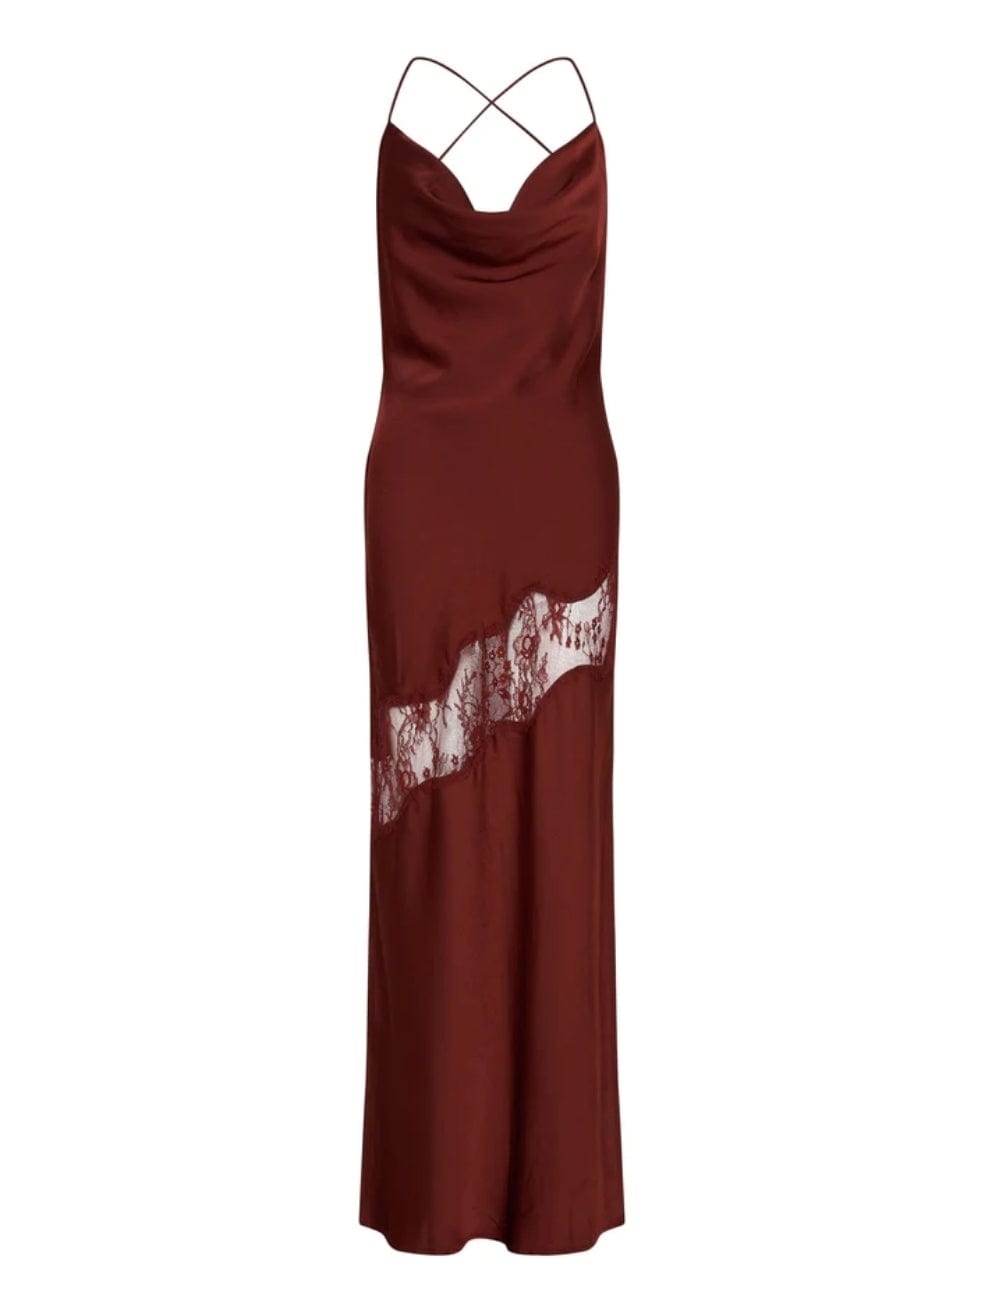 Chandra Lace Detail Satin Maxi Dress in Cherry Chocolate